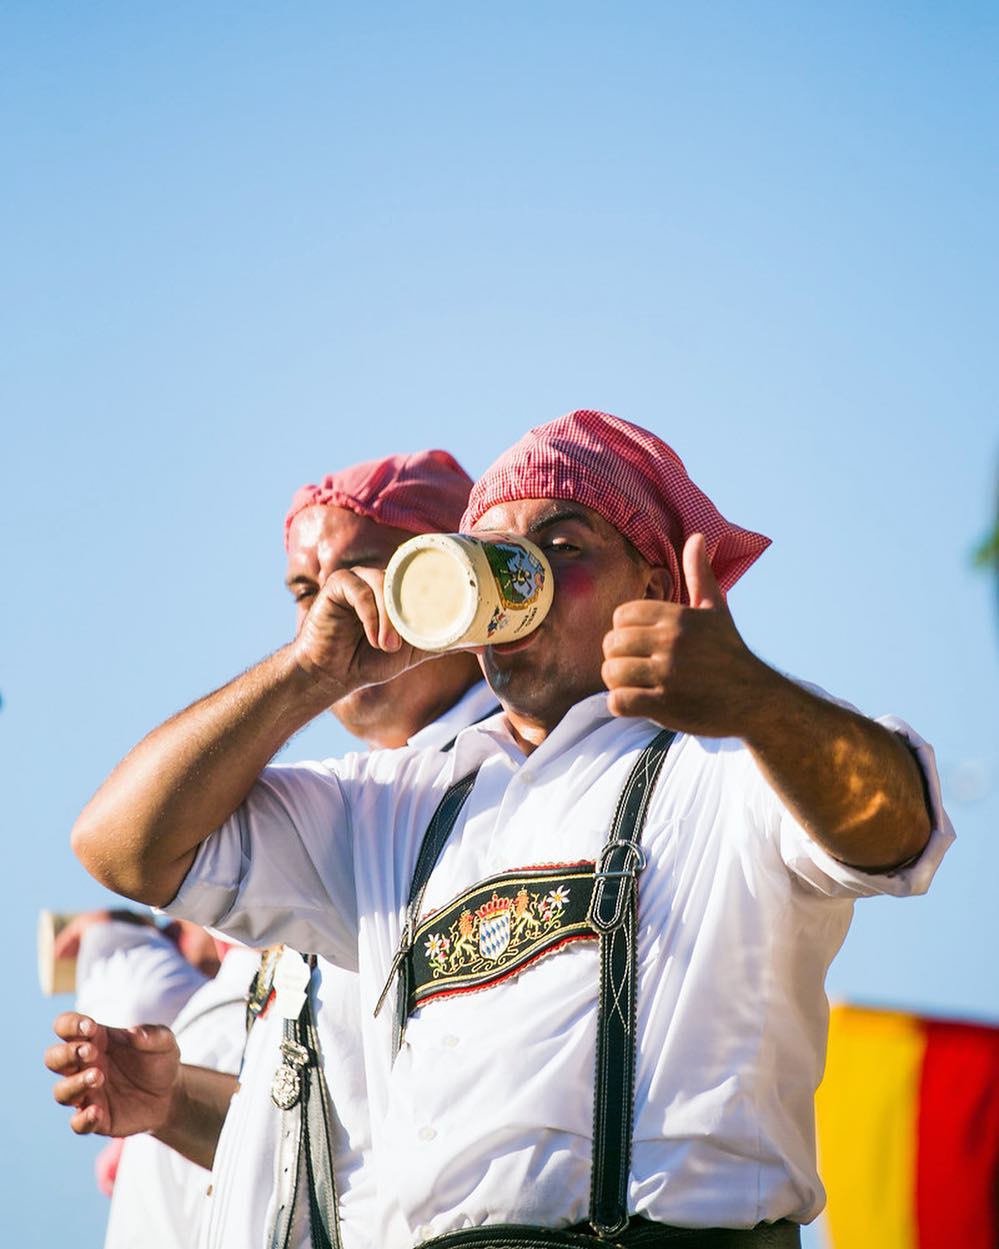 Two guys drinking beer at a German festival. Photo by Instagram user @germanfest